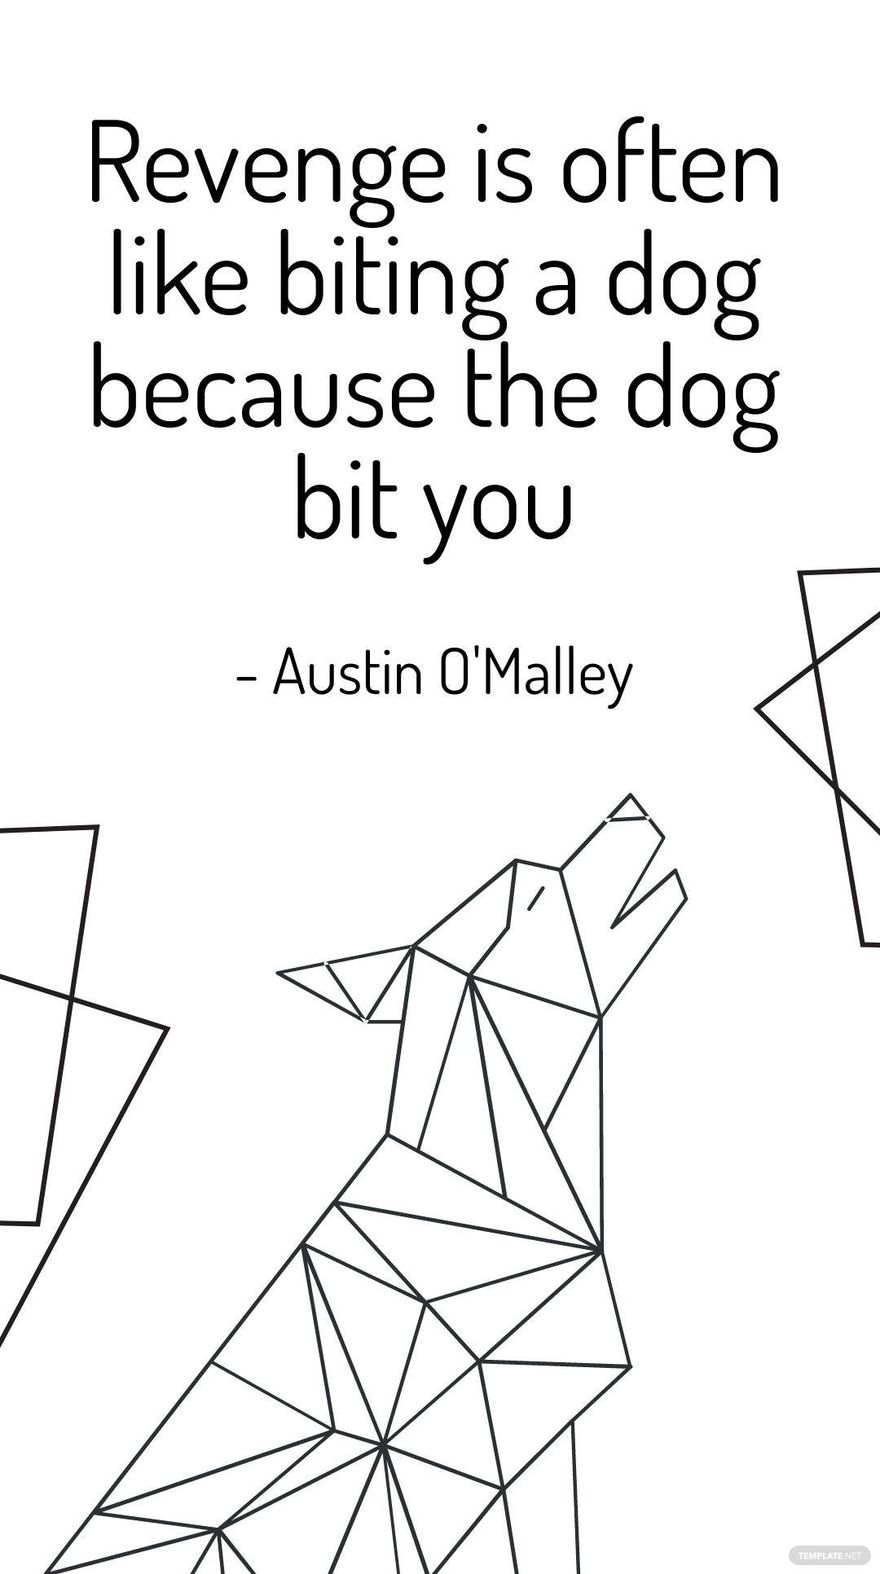 Austin O'Malley - Revenge is often like biting a dog because the dog bit you